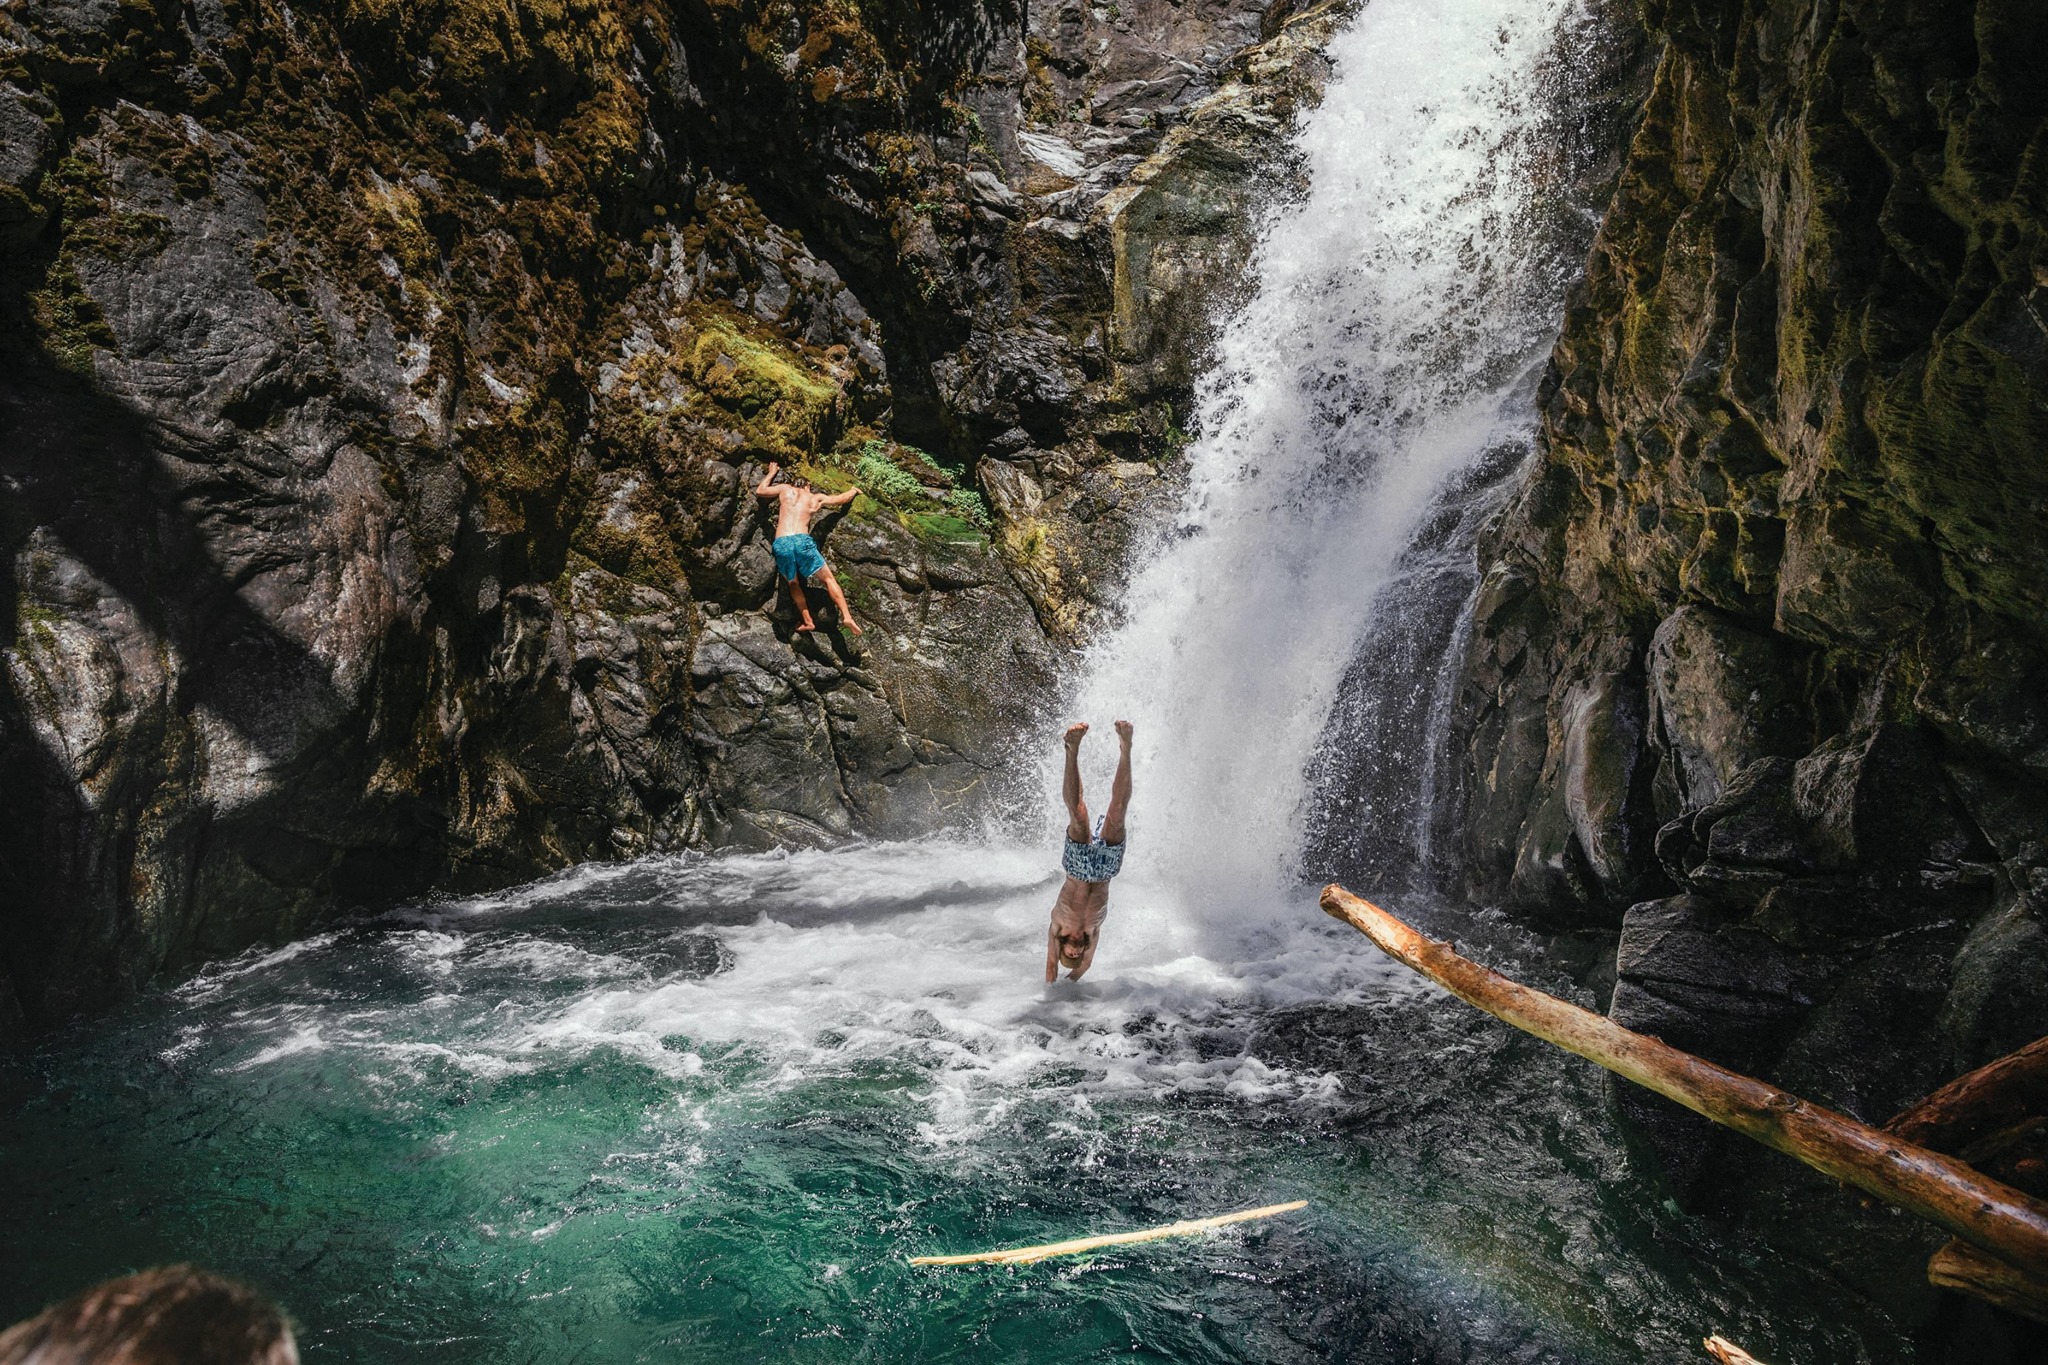 Emerald-pool bouldering and cliff jumping between wilderness therapy and NOLS shifts near Stehekin, Washington.